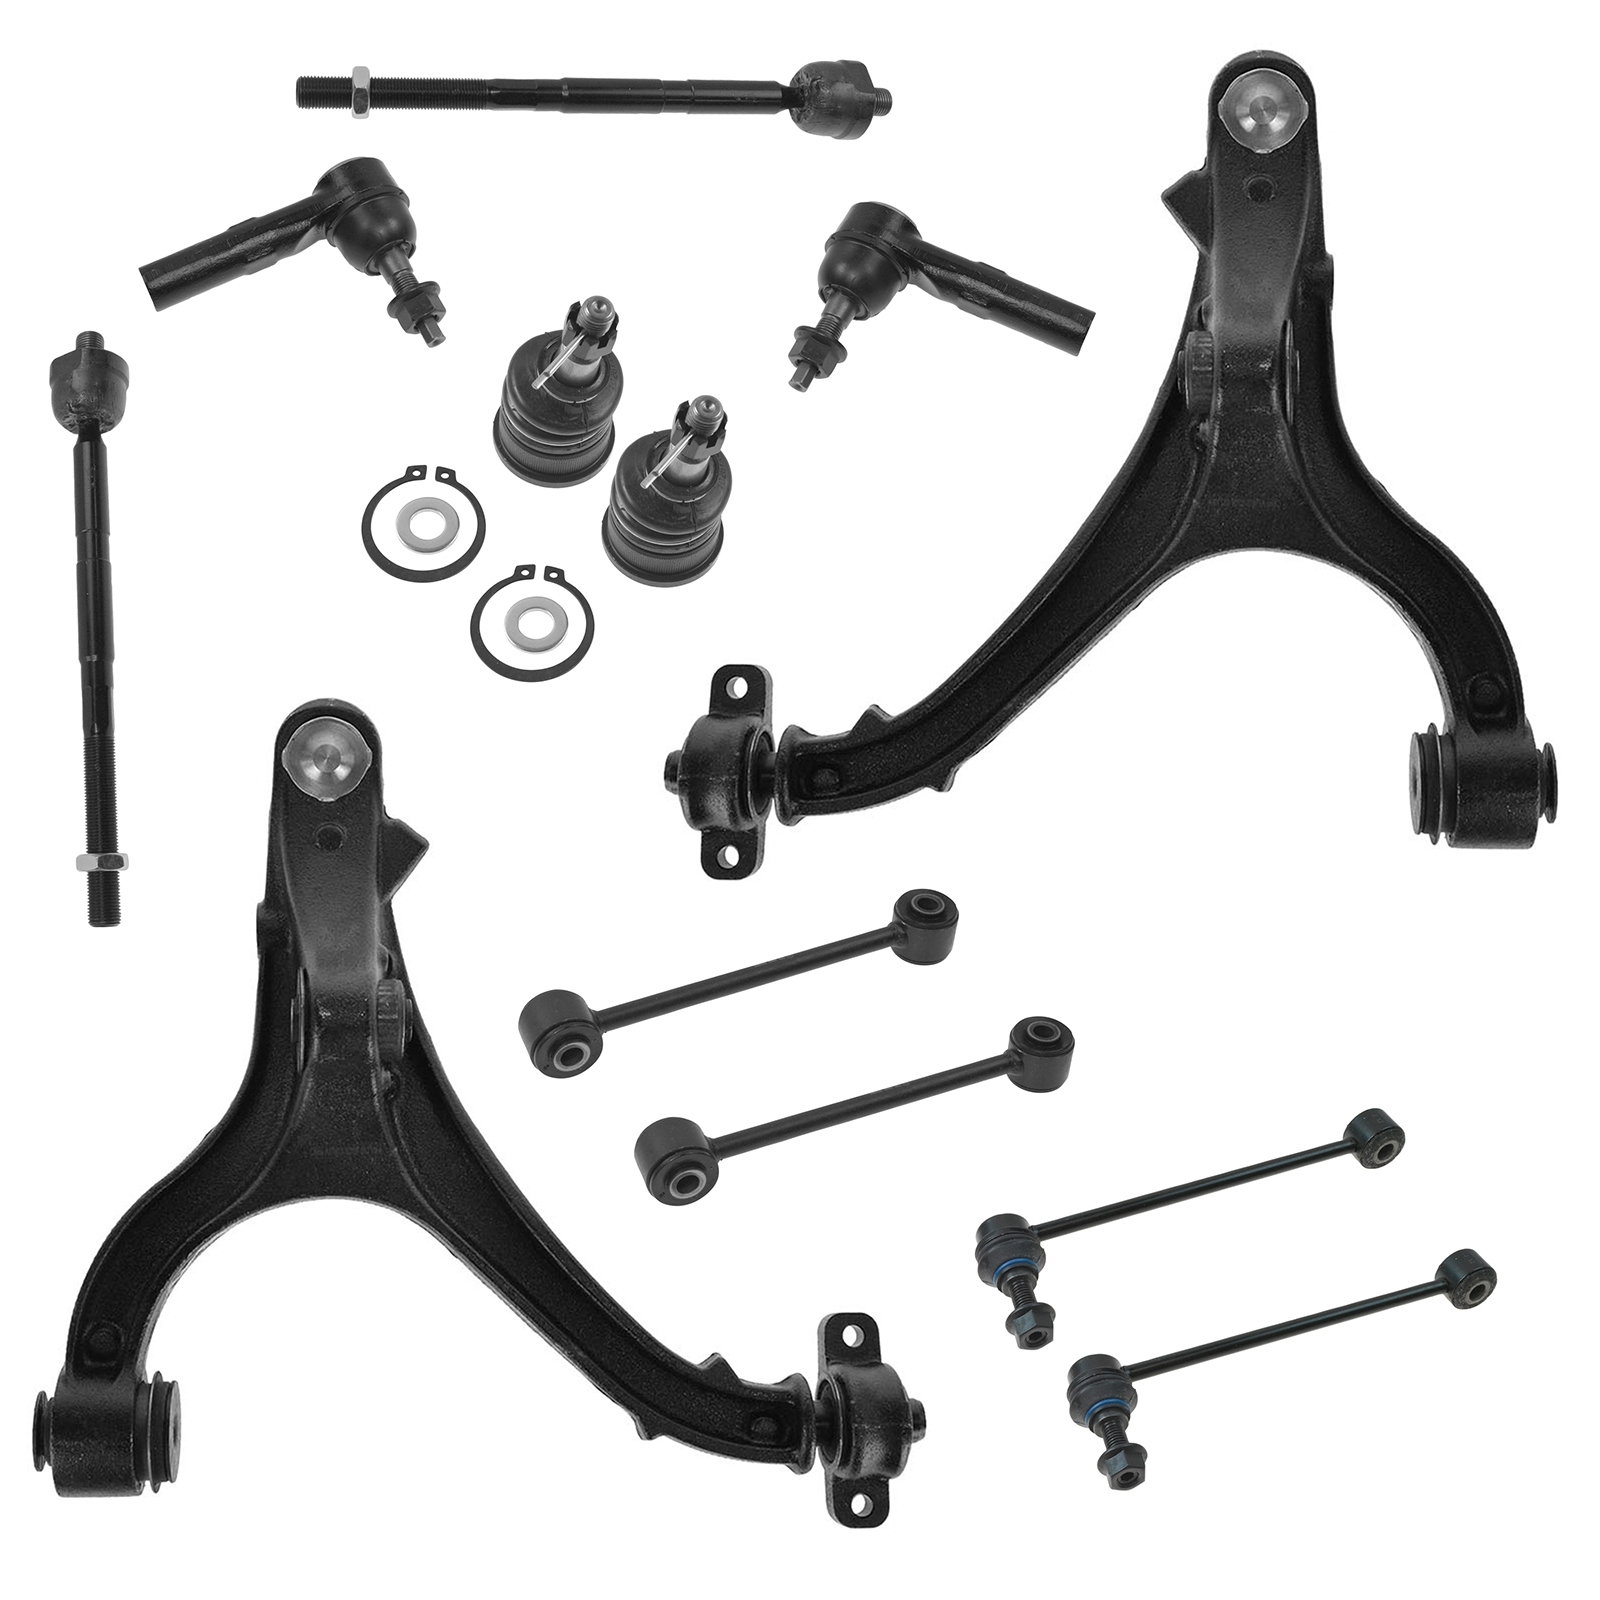 Trq 12 Piece Steering & Suspension Service Kit With Lower Control Arms For 05-10 Grand Cherokee